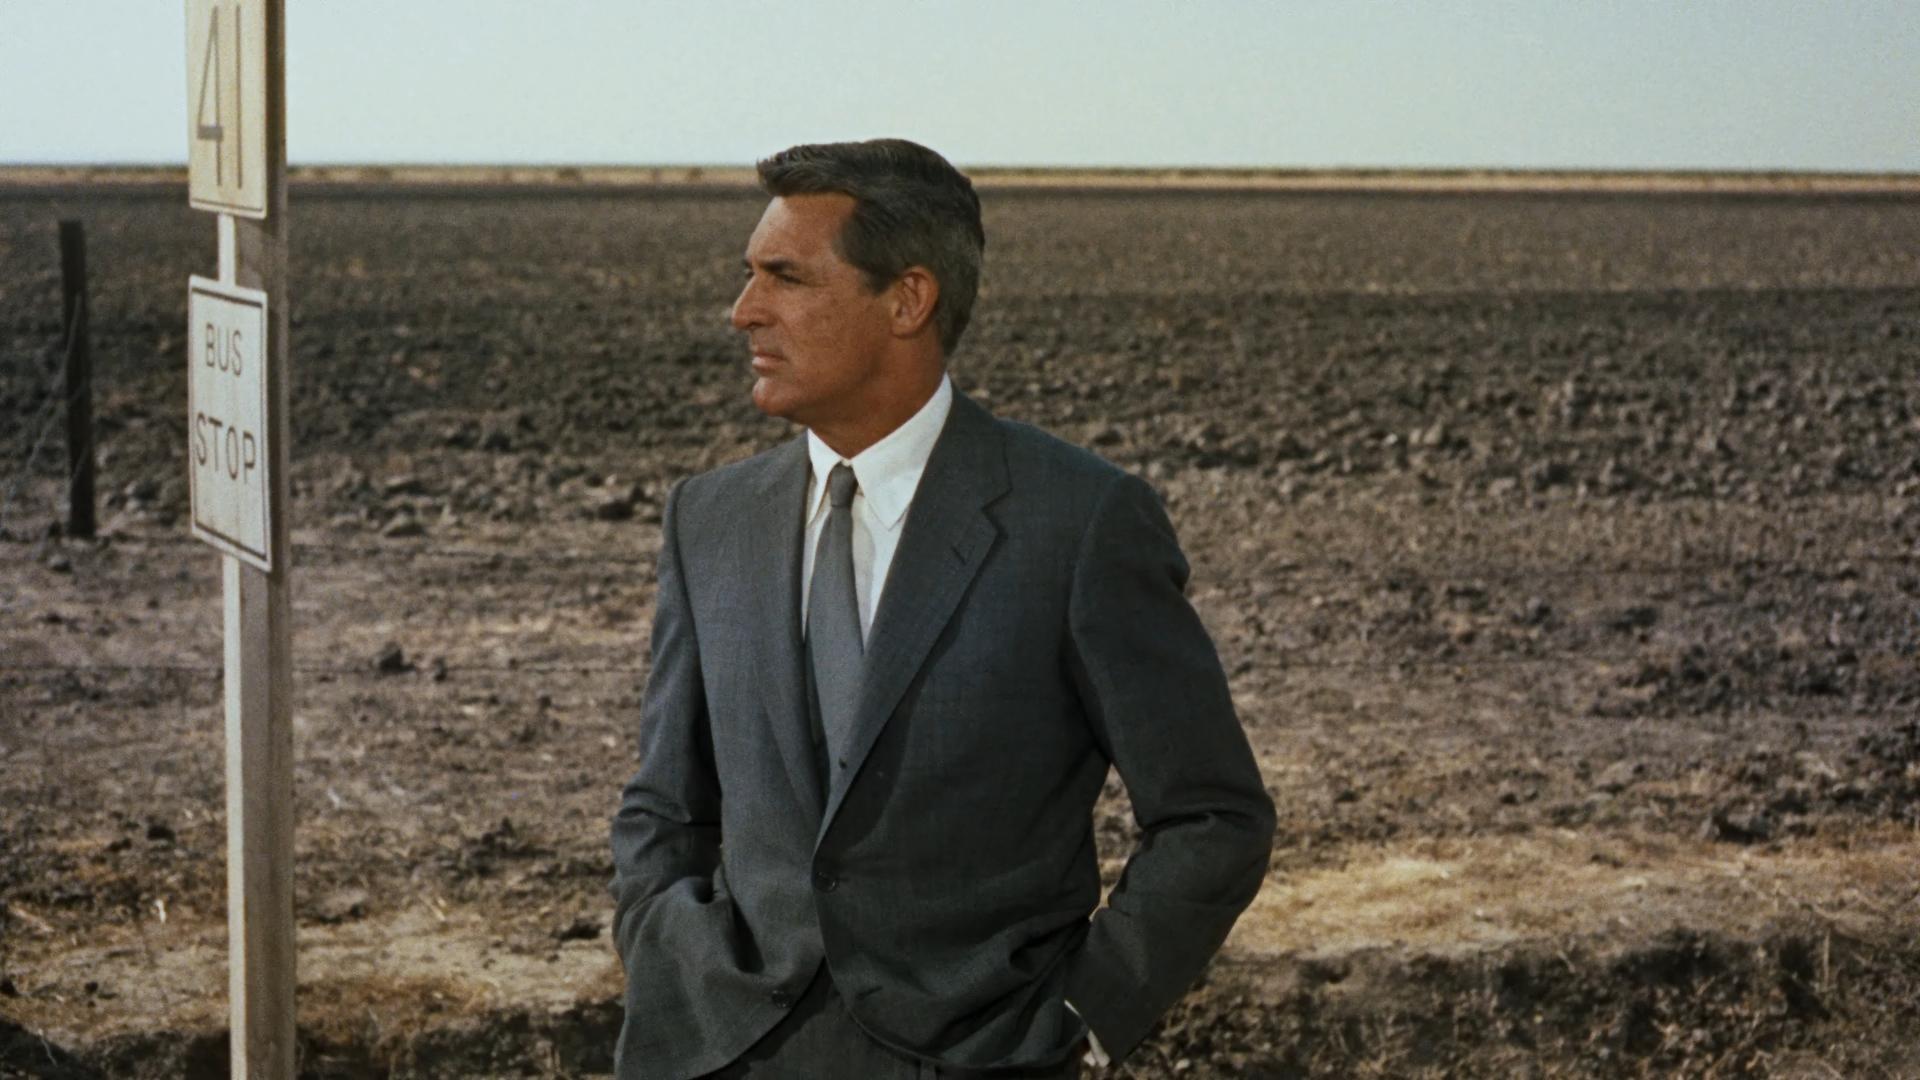 Download wallpaper 1920x1080 north by northwest, roger